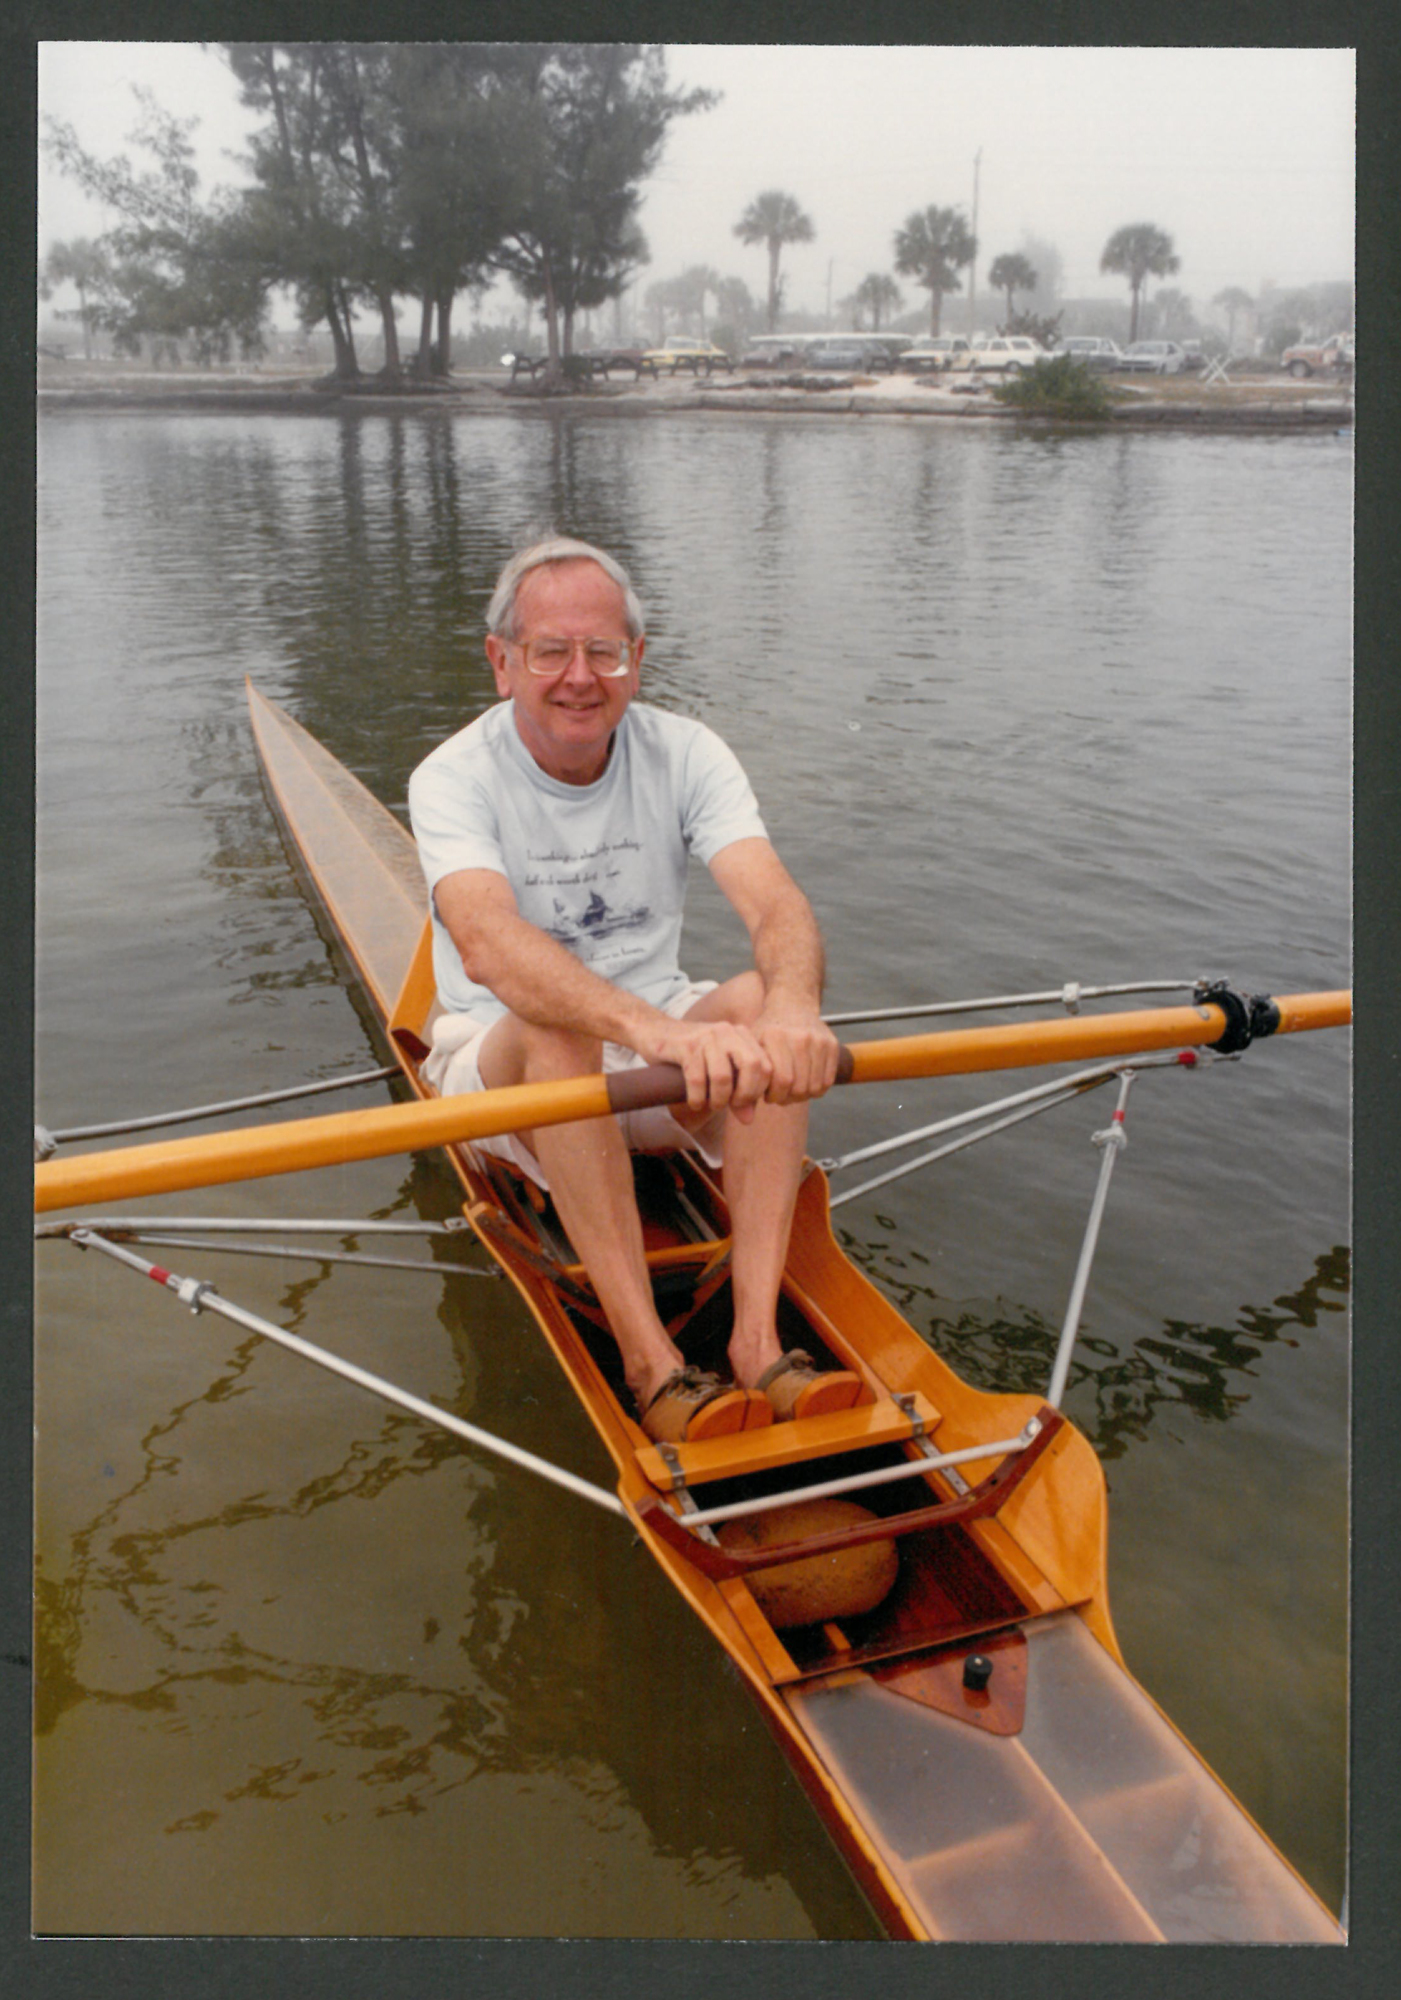 Art Ferguson circa 1971, in his wooden single scull boat in Sarasota waters. Ferguson rowed the boat recreationally for 30 years.